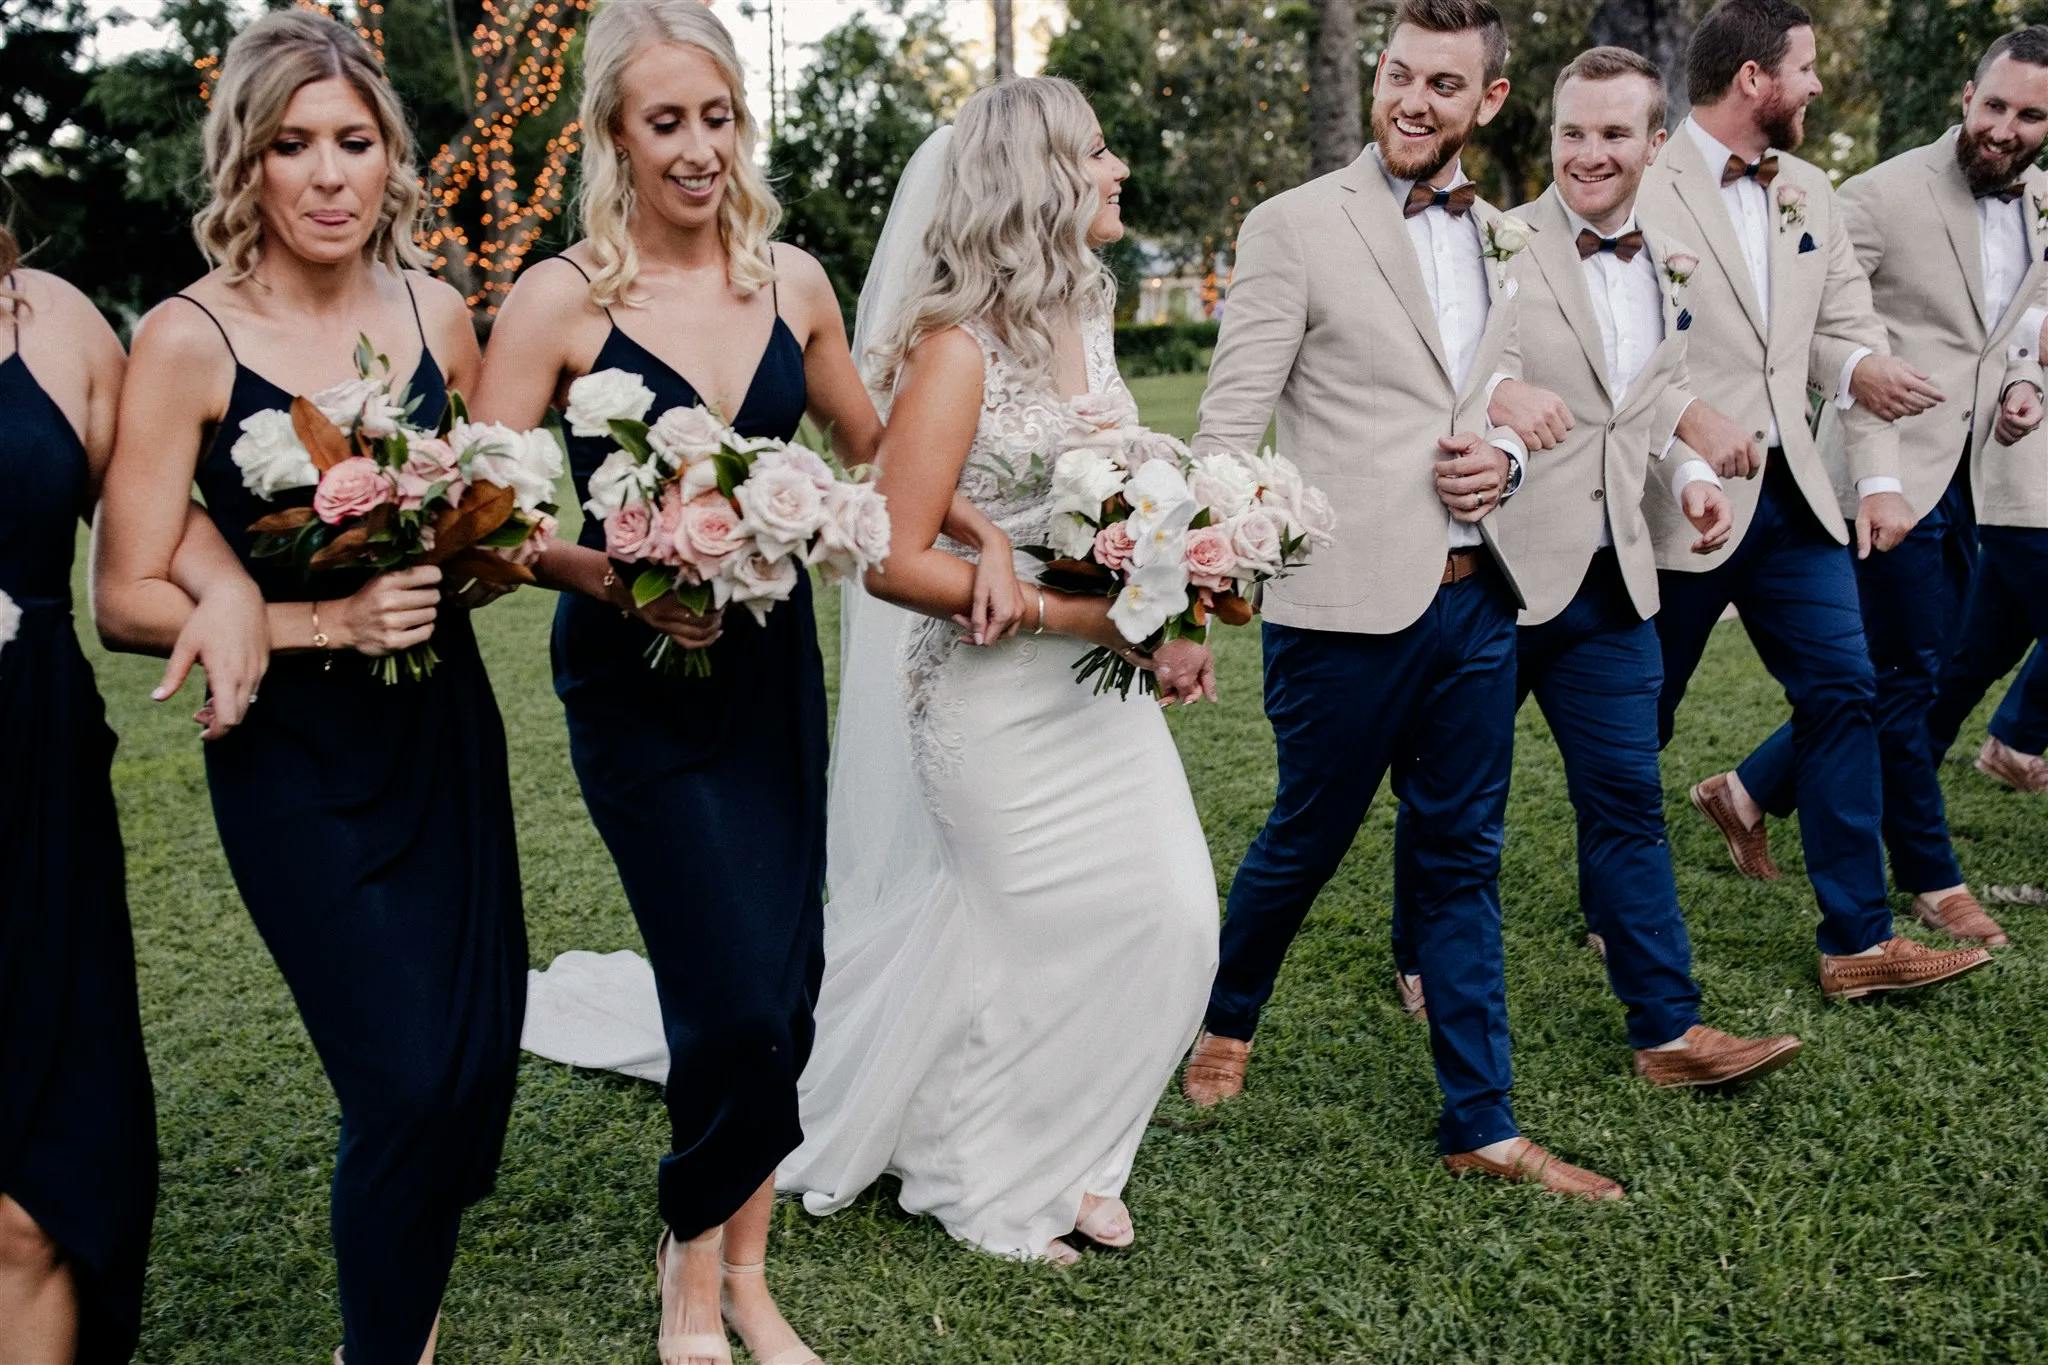 A bride and her bridesmaids, wearing navy blue dresses and holding bouquets of pink and white flowers, walk hand in hand with the groom and his groomsmen, who are dressed in beige jackets, white shirts, bow ties, and blue trousers, on a grassy lawn.